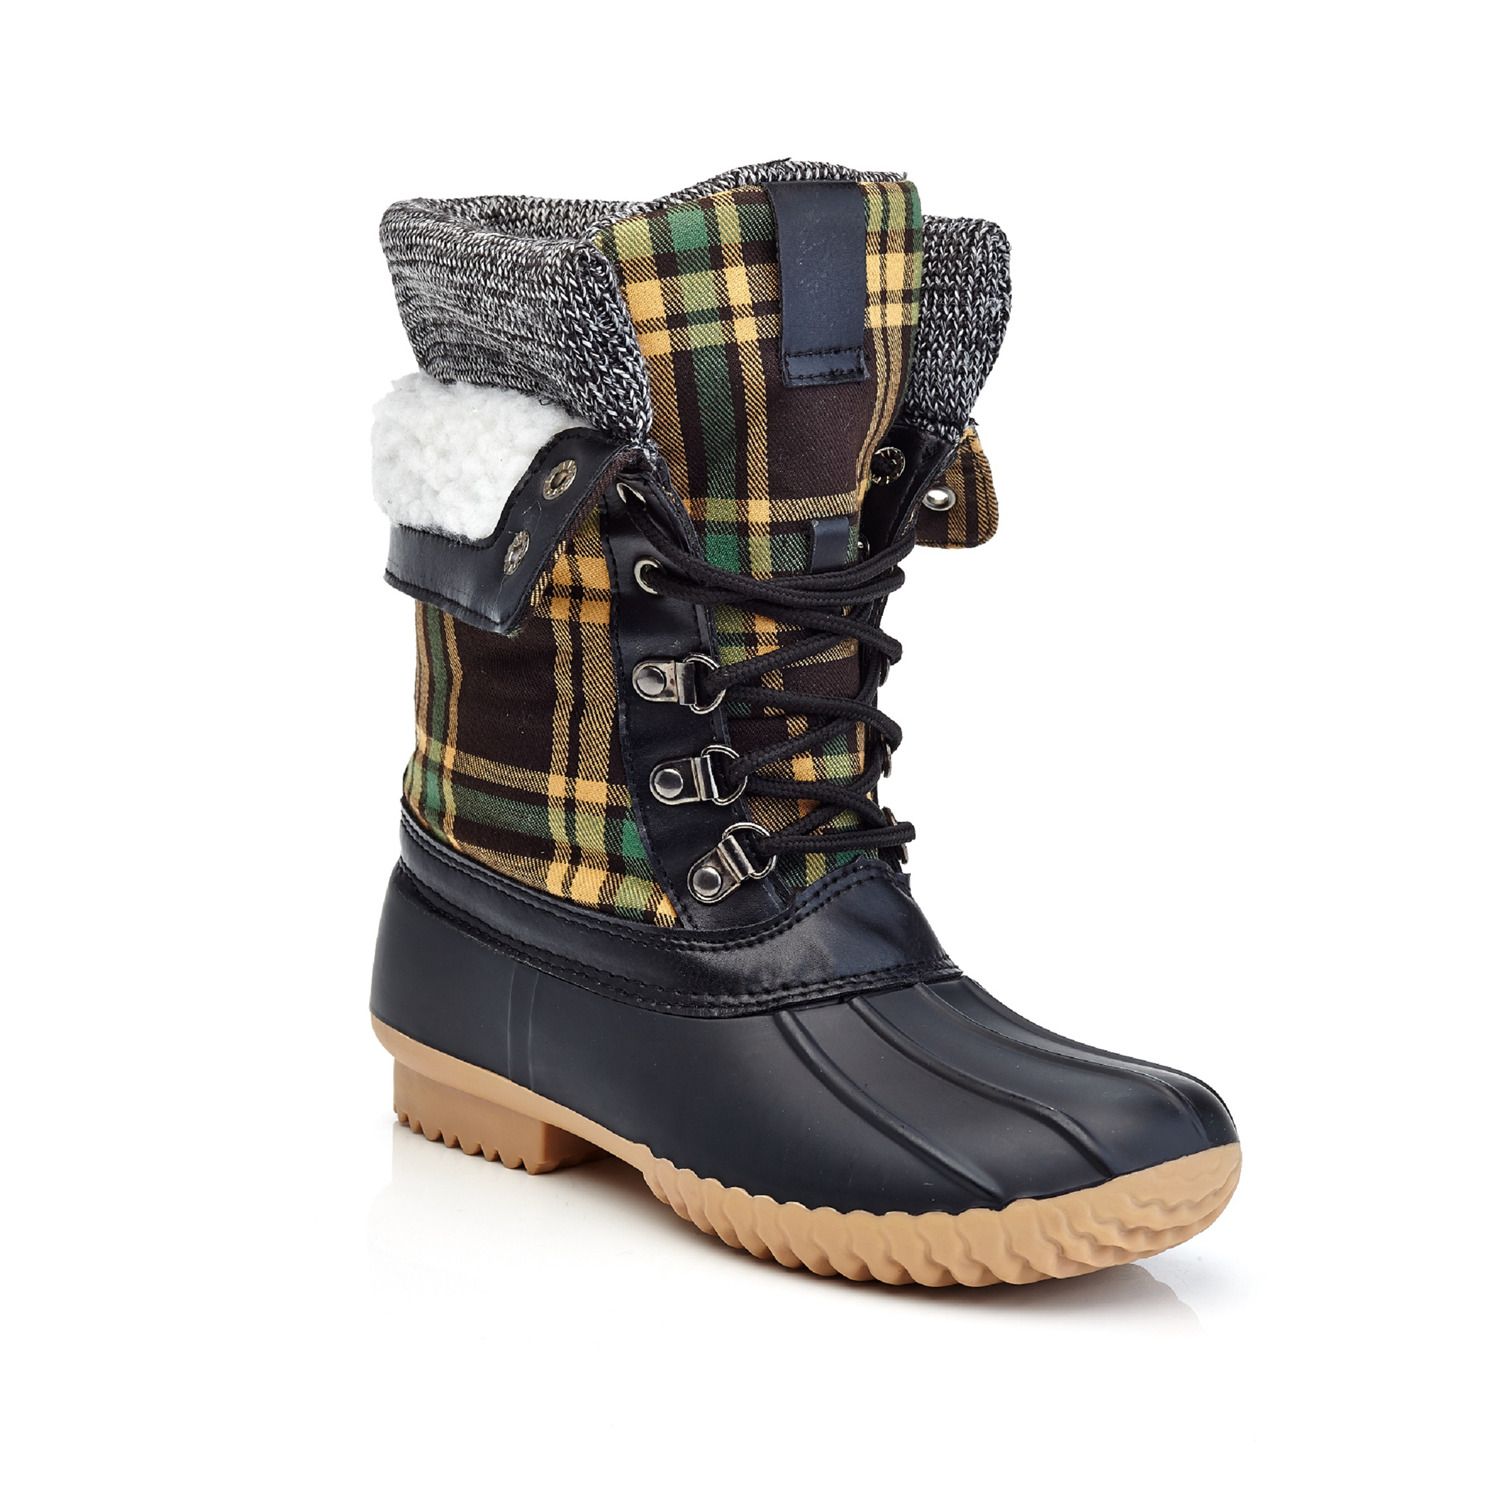 Image for Henry Ferrera Mission 26 Plaid Women's Water-Resistant Winter Boots at Kohl's.